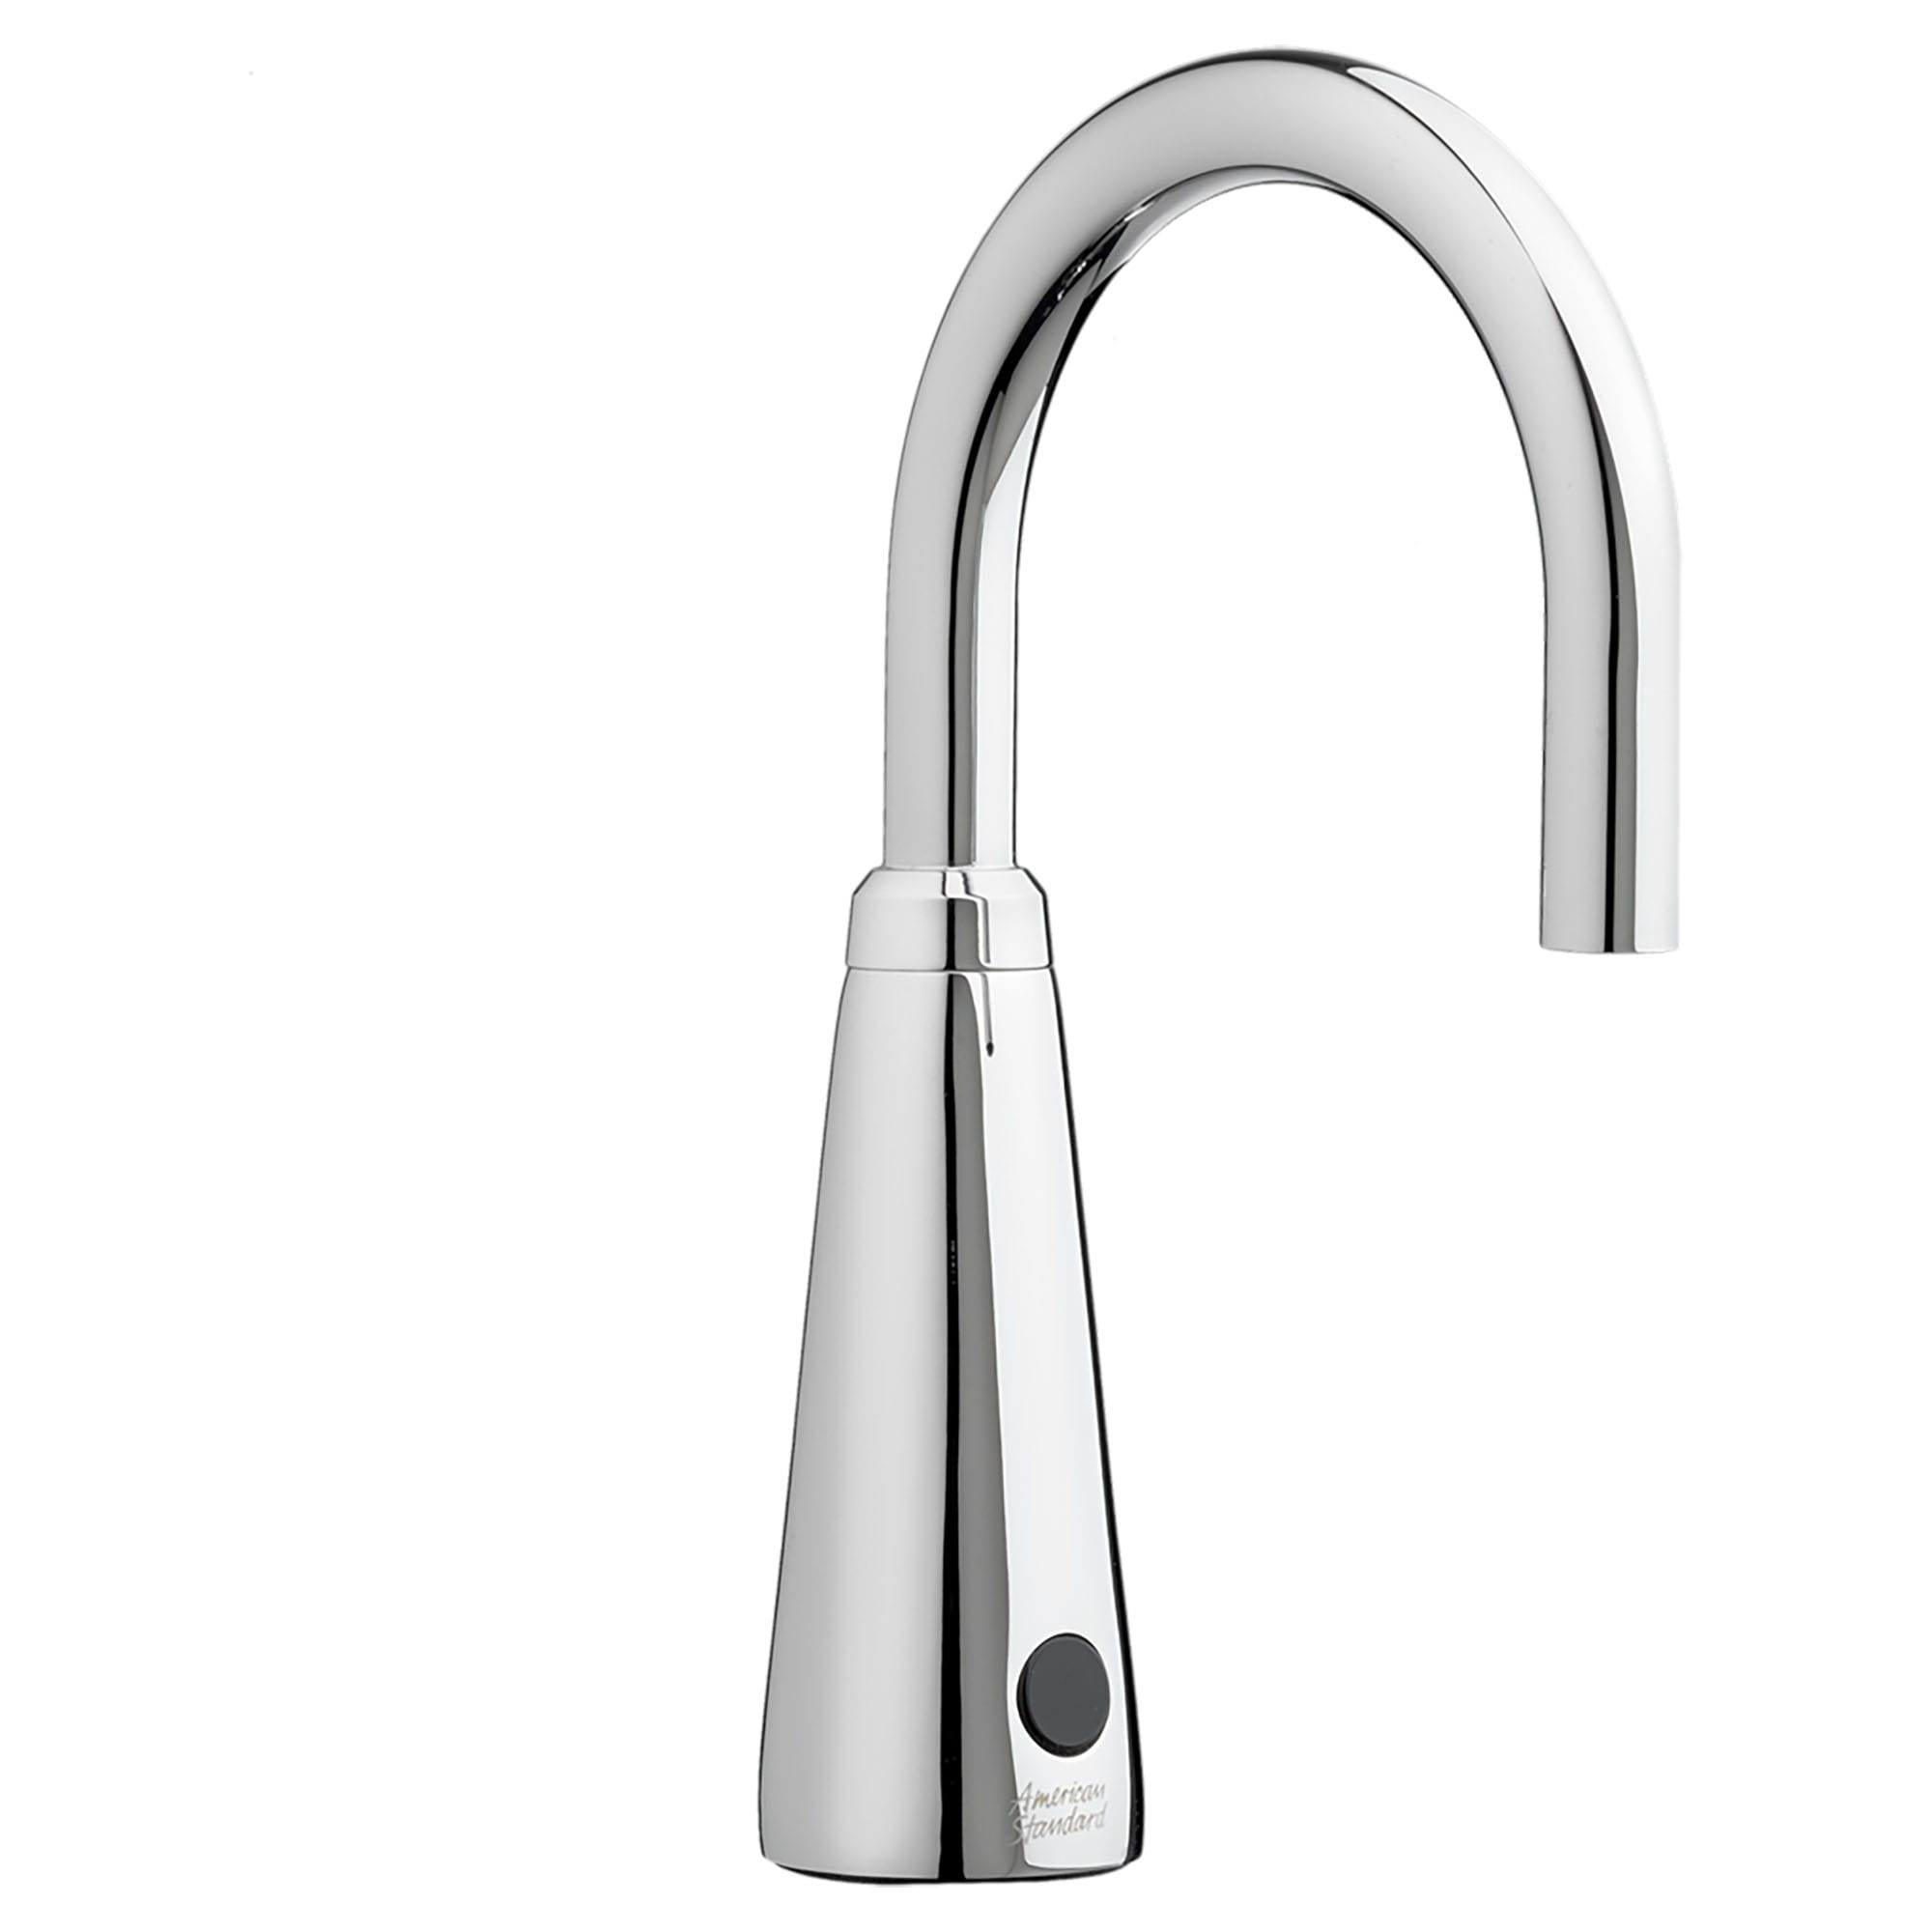 Selectronic® IC Touchless Faucet, Base Model, 1.5 gpm/5.7 Lpm Laminar Flow in Base